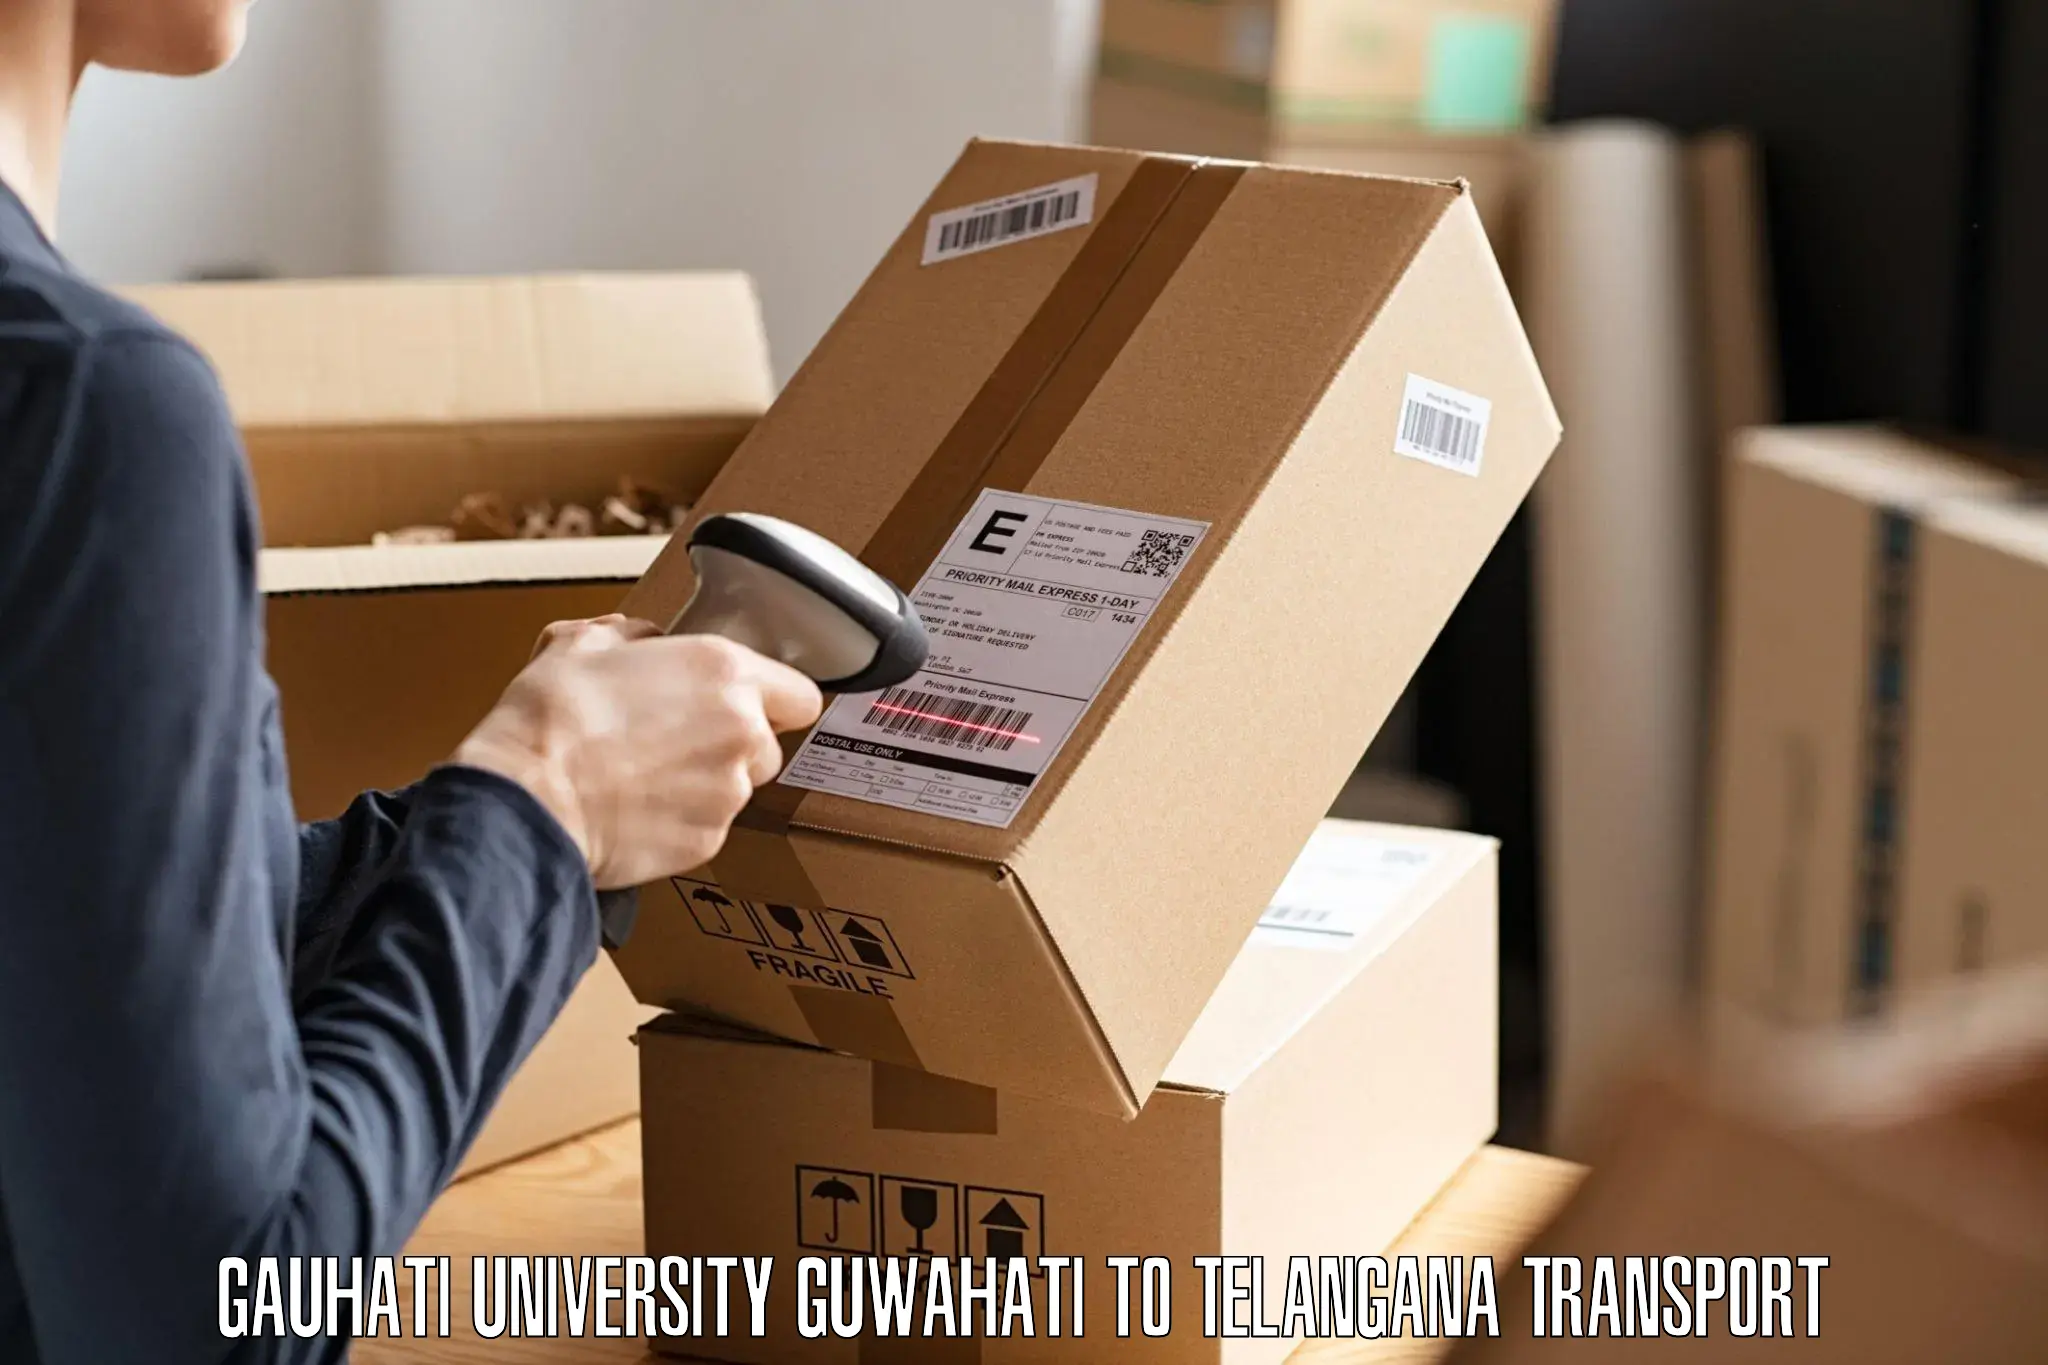 Luggage transport services in Gauhati University Guwahati to Luxettipet